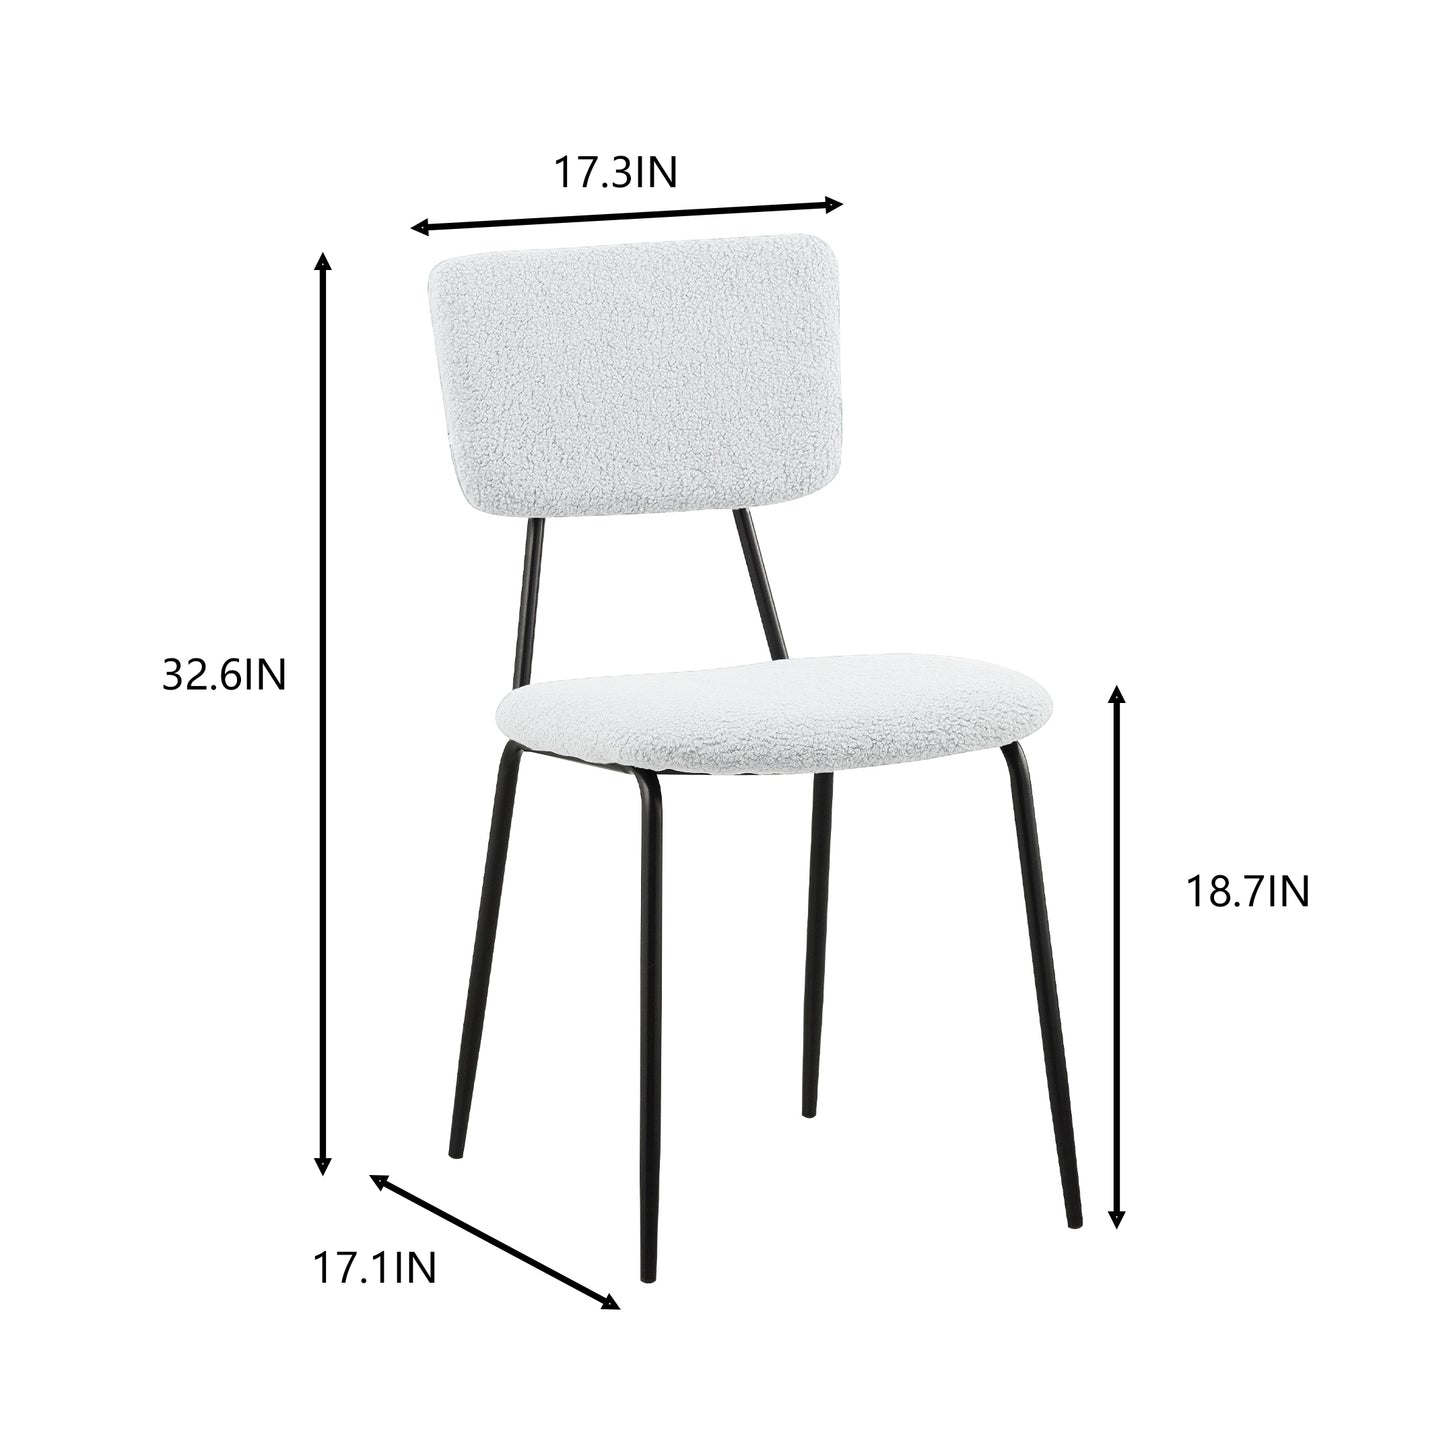 SogesPower Dining Chairs Set of 2, Modern Chairs with Faux Plush Upholstered Back and Chrome Legs, (2 White Chairs)